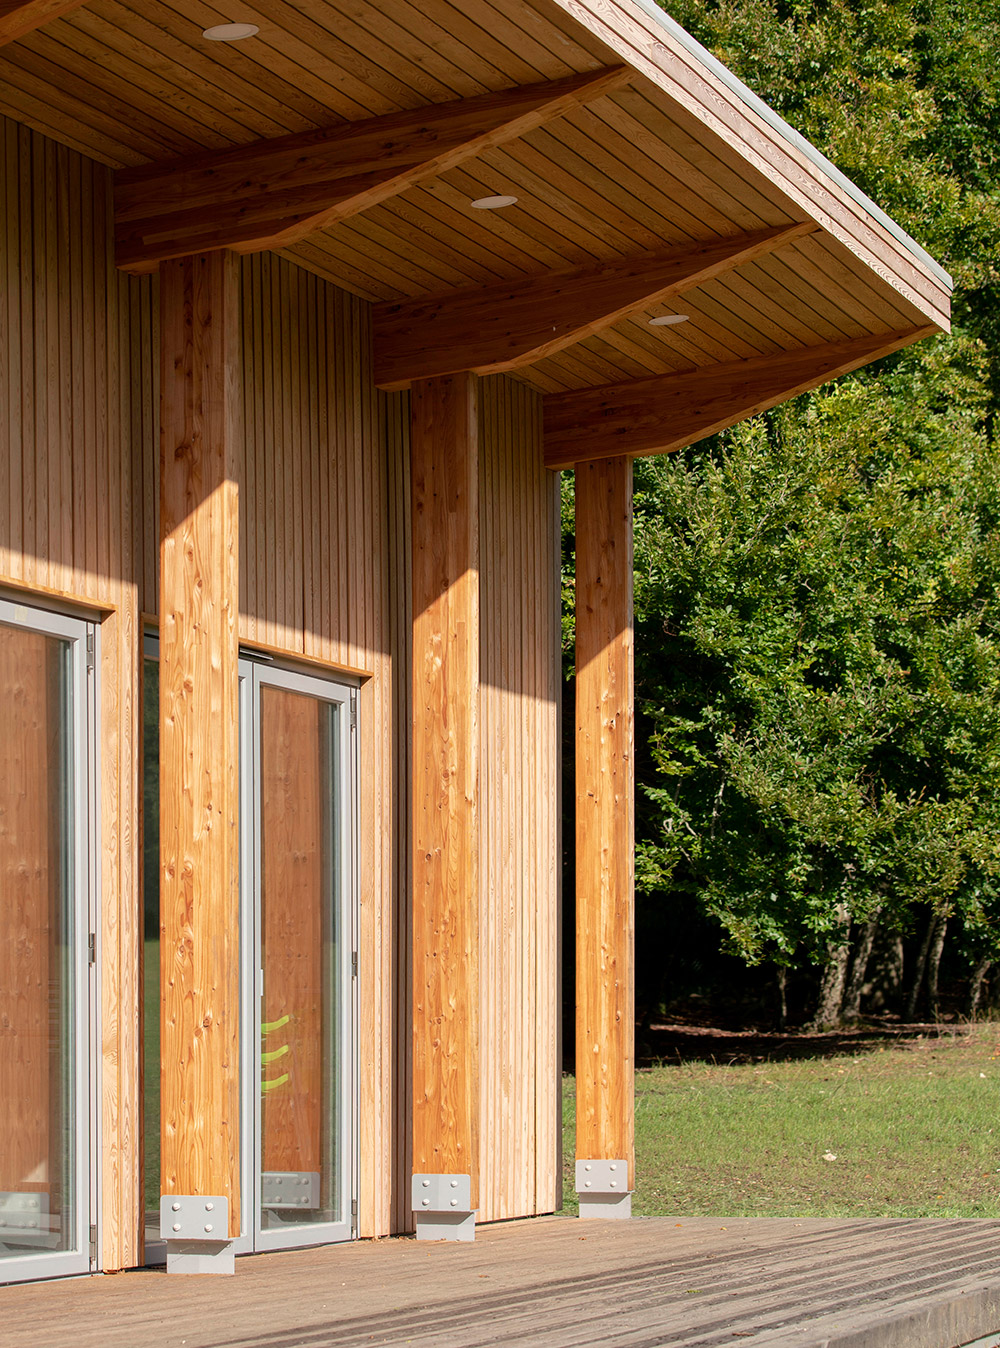 The glulam timber colonnade facing onto the playing views, sheltered by the cantilevered roof.